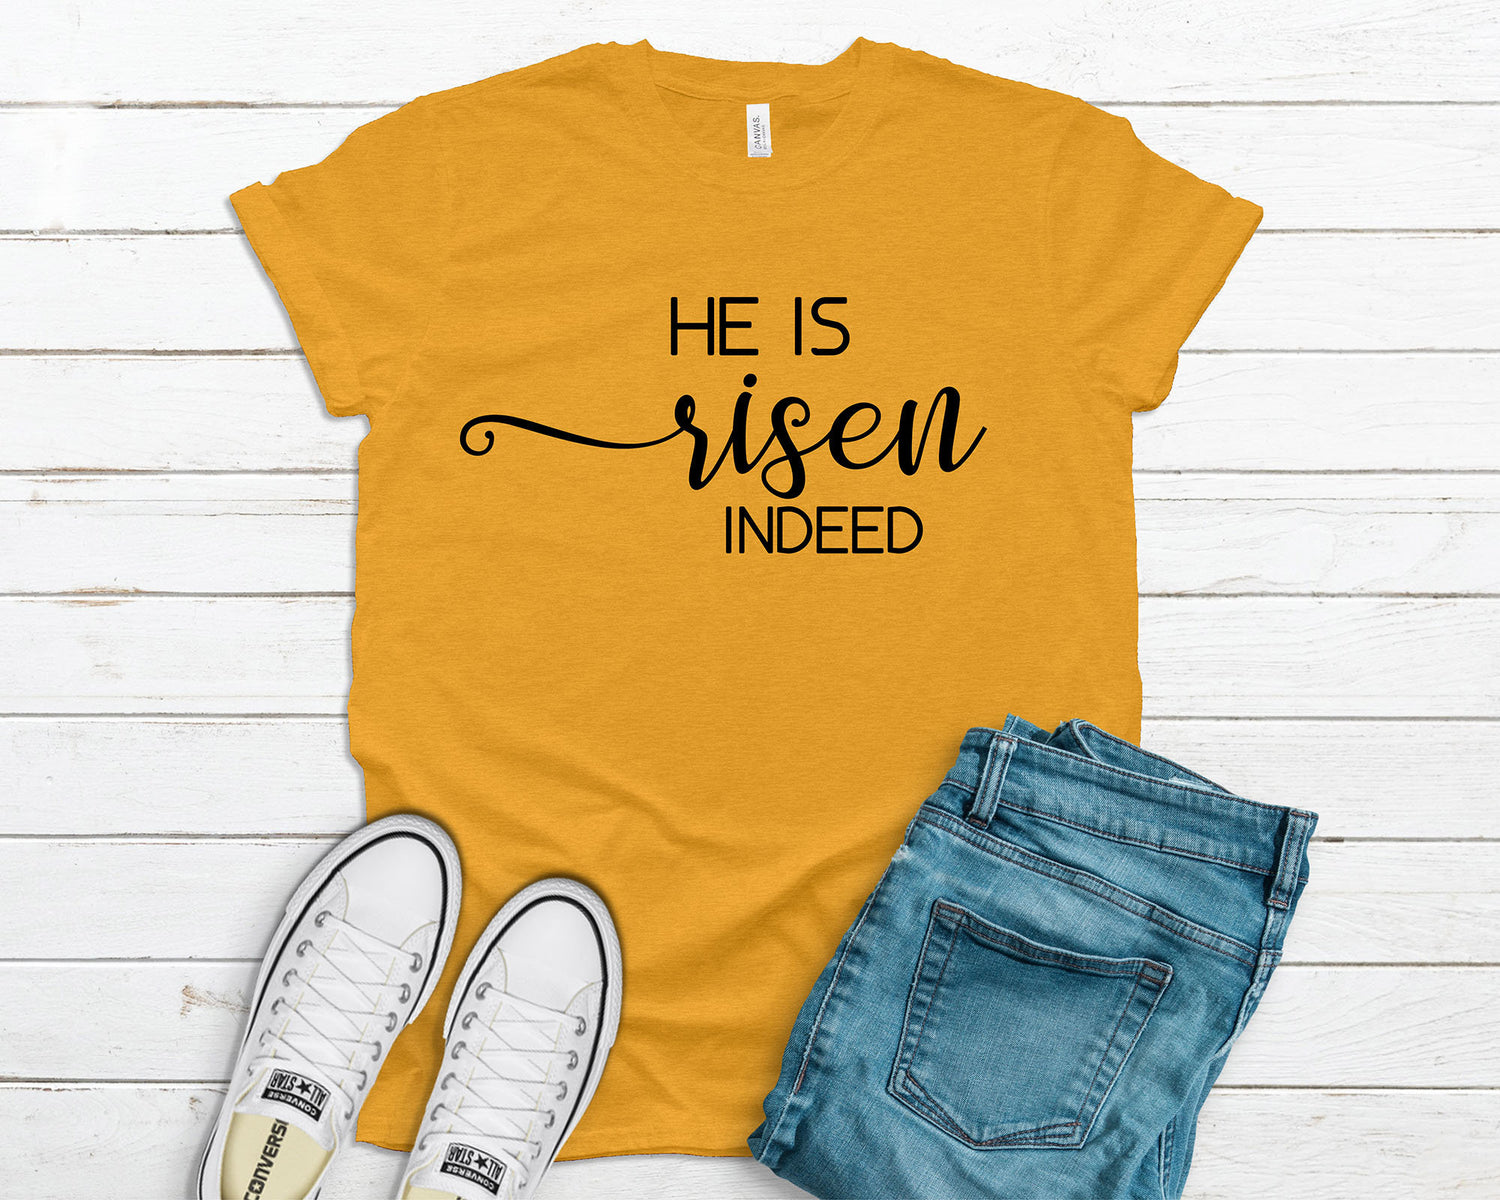 He is Risen Indeed - Bella+Canvas T-shirt